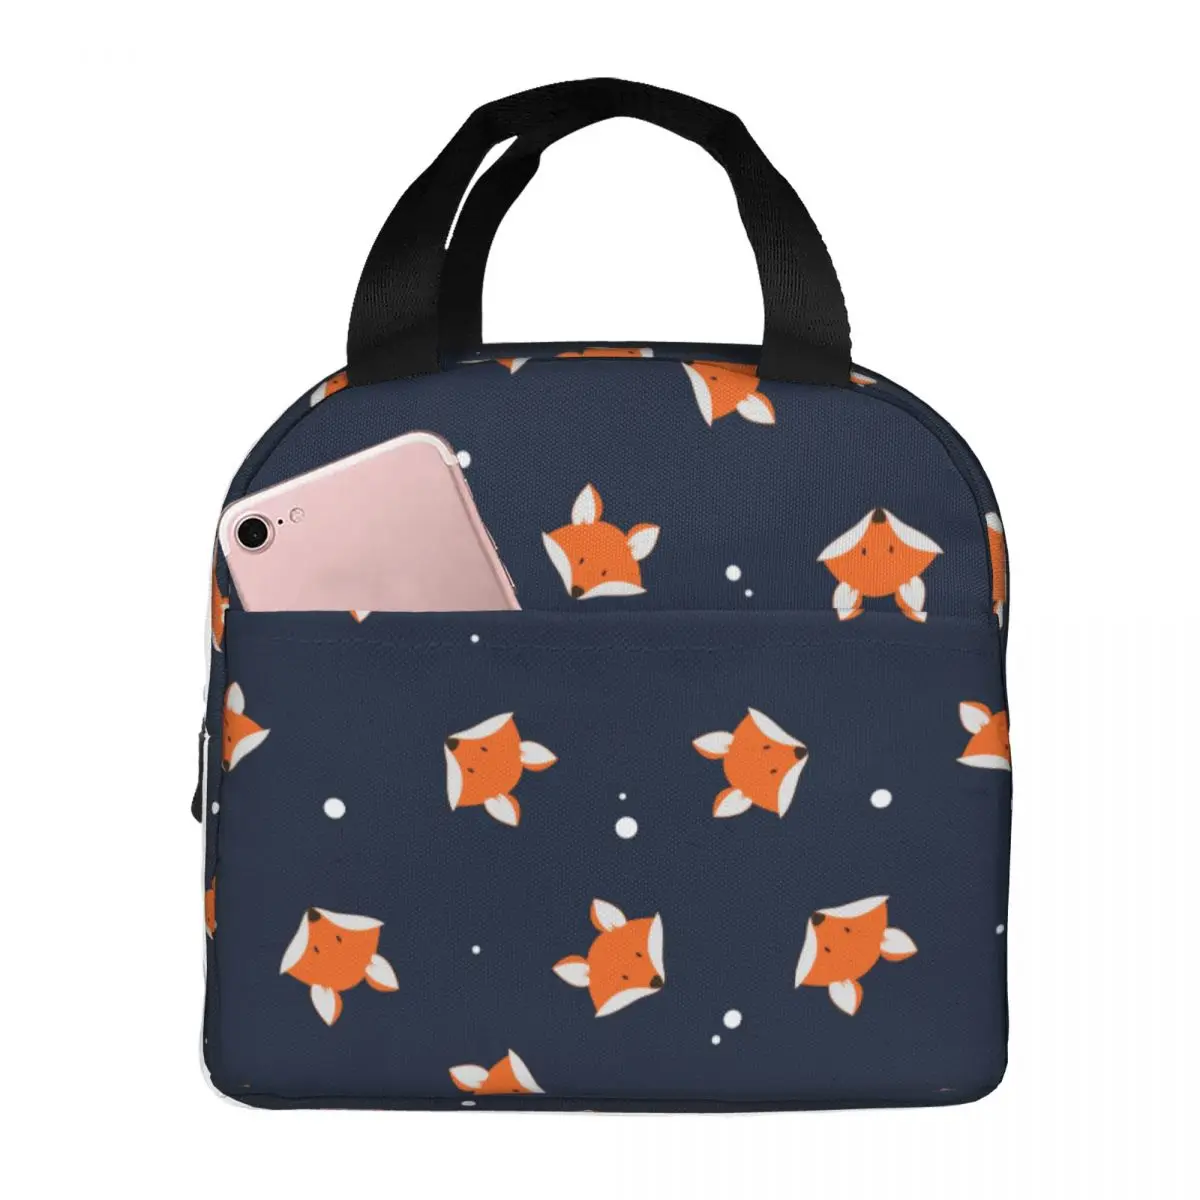 Lunch Bags for Women Kids Fox Thermal Cooler Bag Portable Picnic Work Animal Canvas Tote Handbags